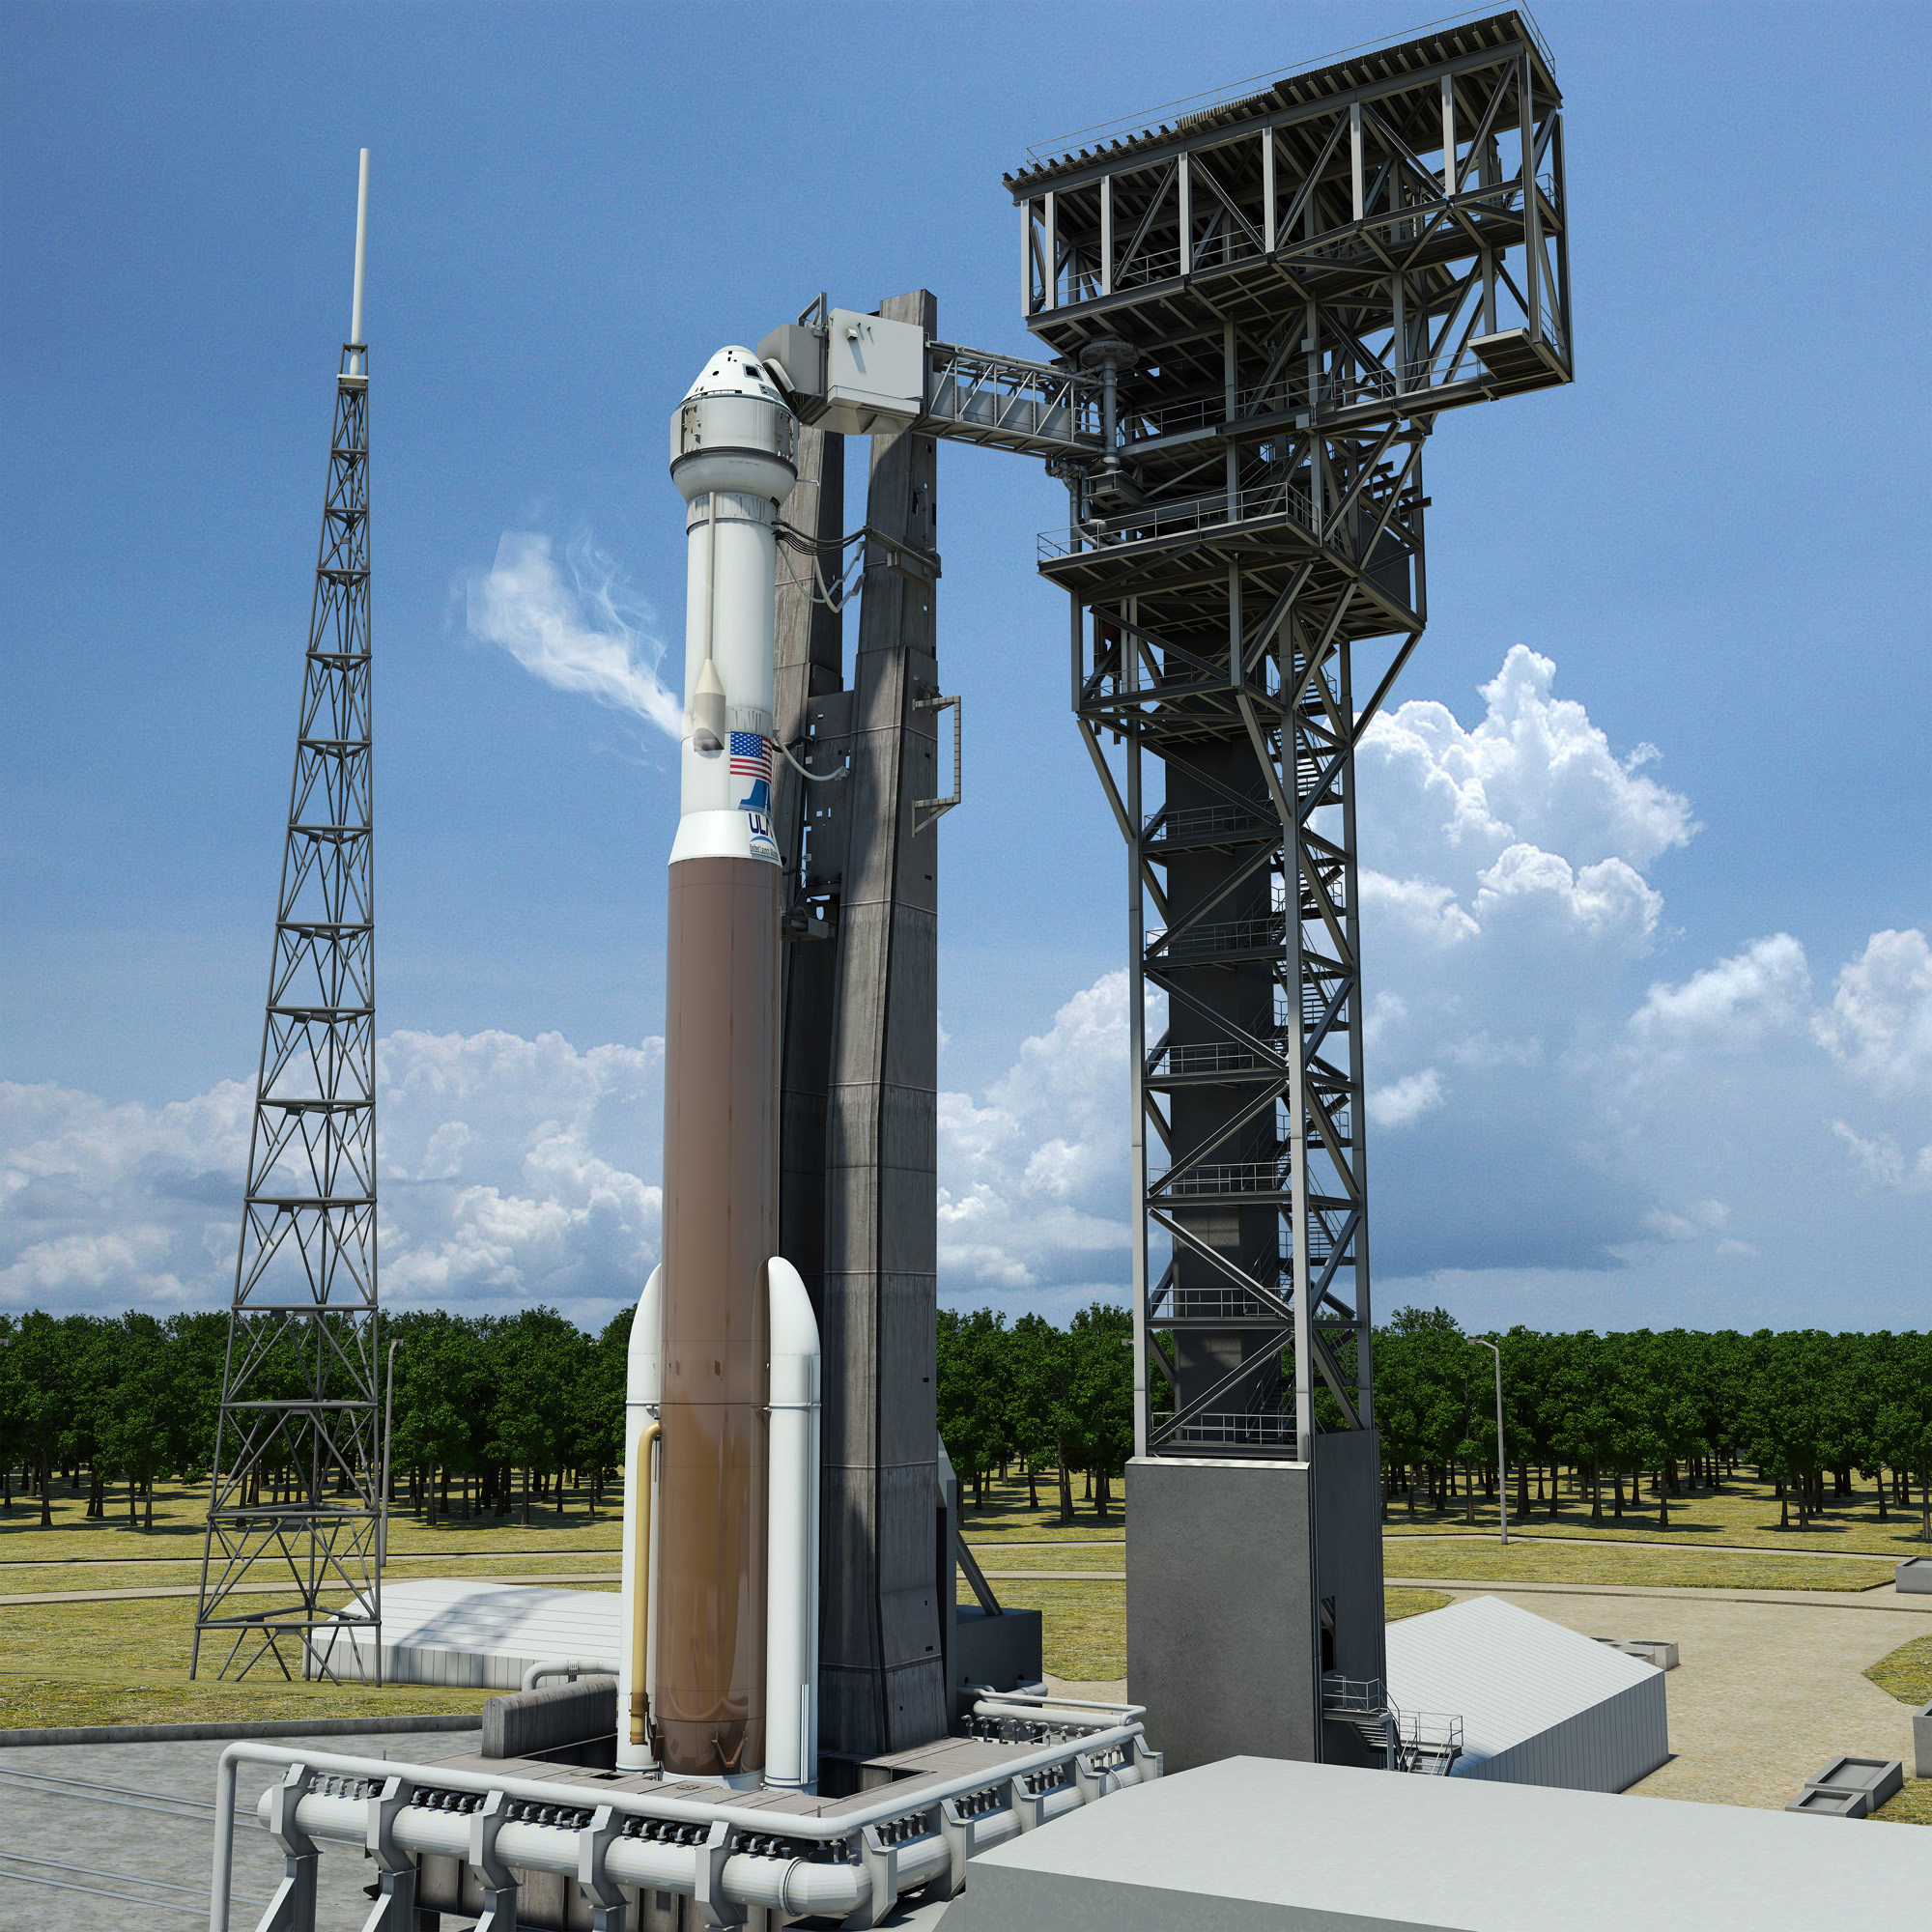 Artist’s concept of Boeing’s CST-100 space taxi ready for liftoff atop a man rated ULA Atlas-V rocket showing new crew access tower and arm at Space Launch Complex 41, Cape Canaveral Air Force Station, Fl. Credit: ULA